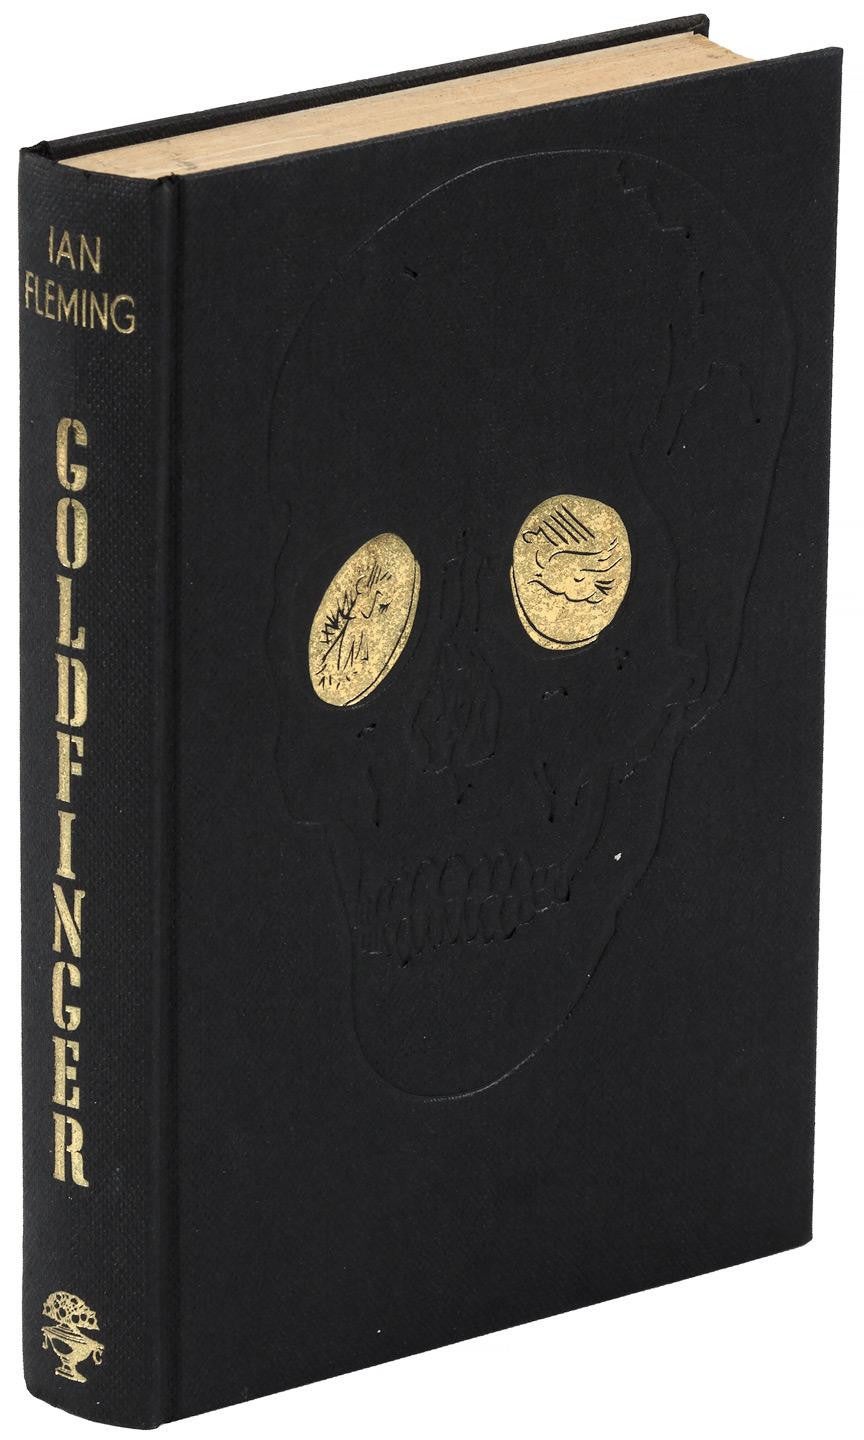 Fine, first edition copy in black cloth with gilt spine lettering and golden coins serving as eyes on a blind-stamped skull on the front panel. The dust jacket is also fine and first issue. 

A lovely copy of the author's seventh James Bond novel